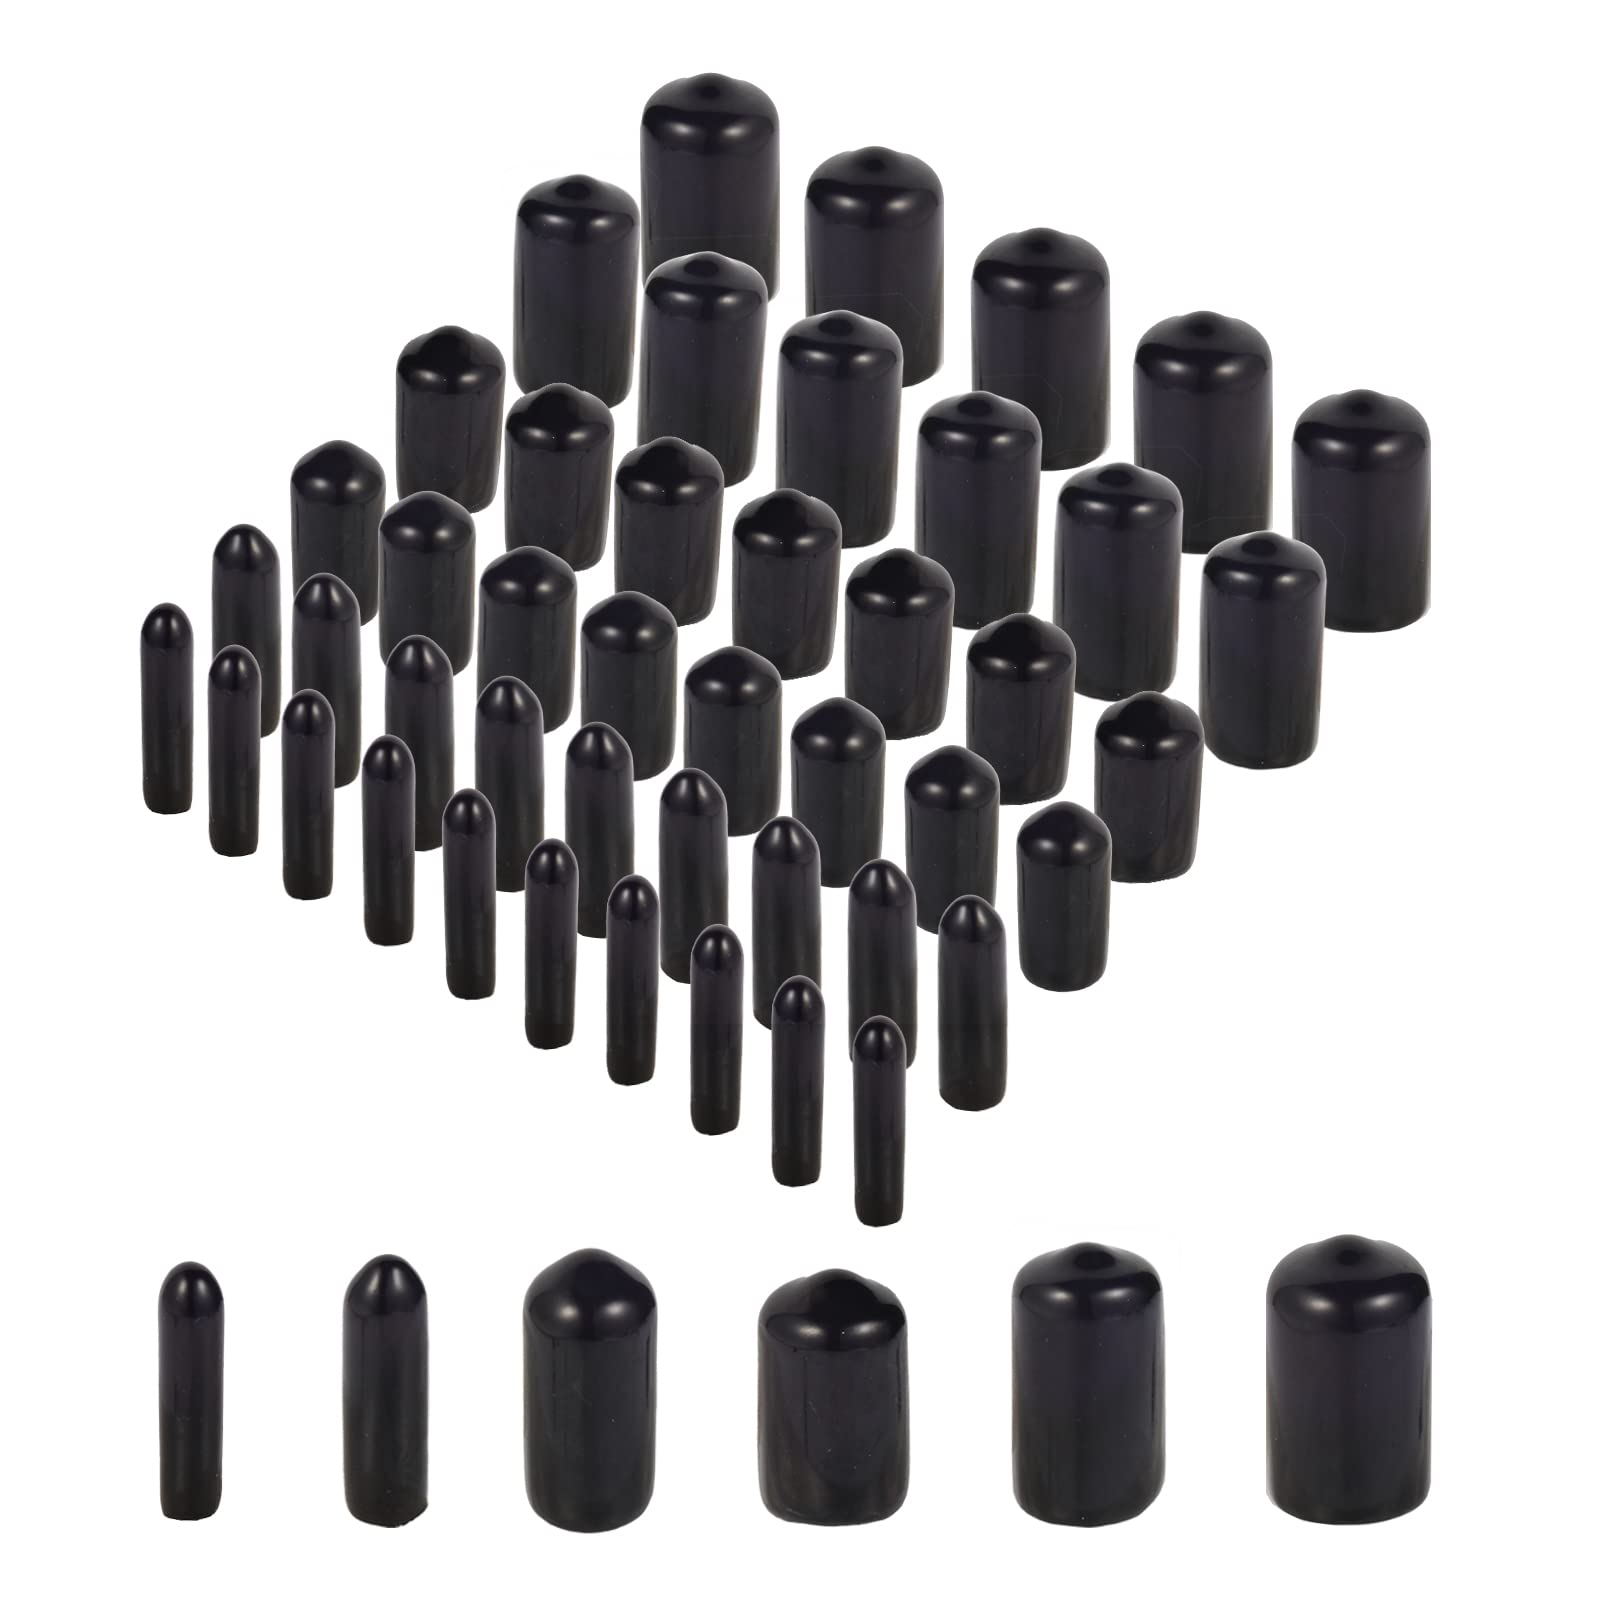 Rubber End Caps 60pcs Flexible Screw Thread Protector Caps Bolt Covers Rubber Bolt Covers Caps, Rubber Screw Caps for Metal Tube Rod Bolt in 6 Size 0.08 to 0.47 Inch(2mm,3mm,6.5mm,8mm,10mm,12mm)